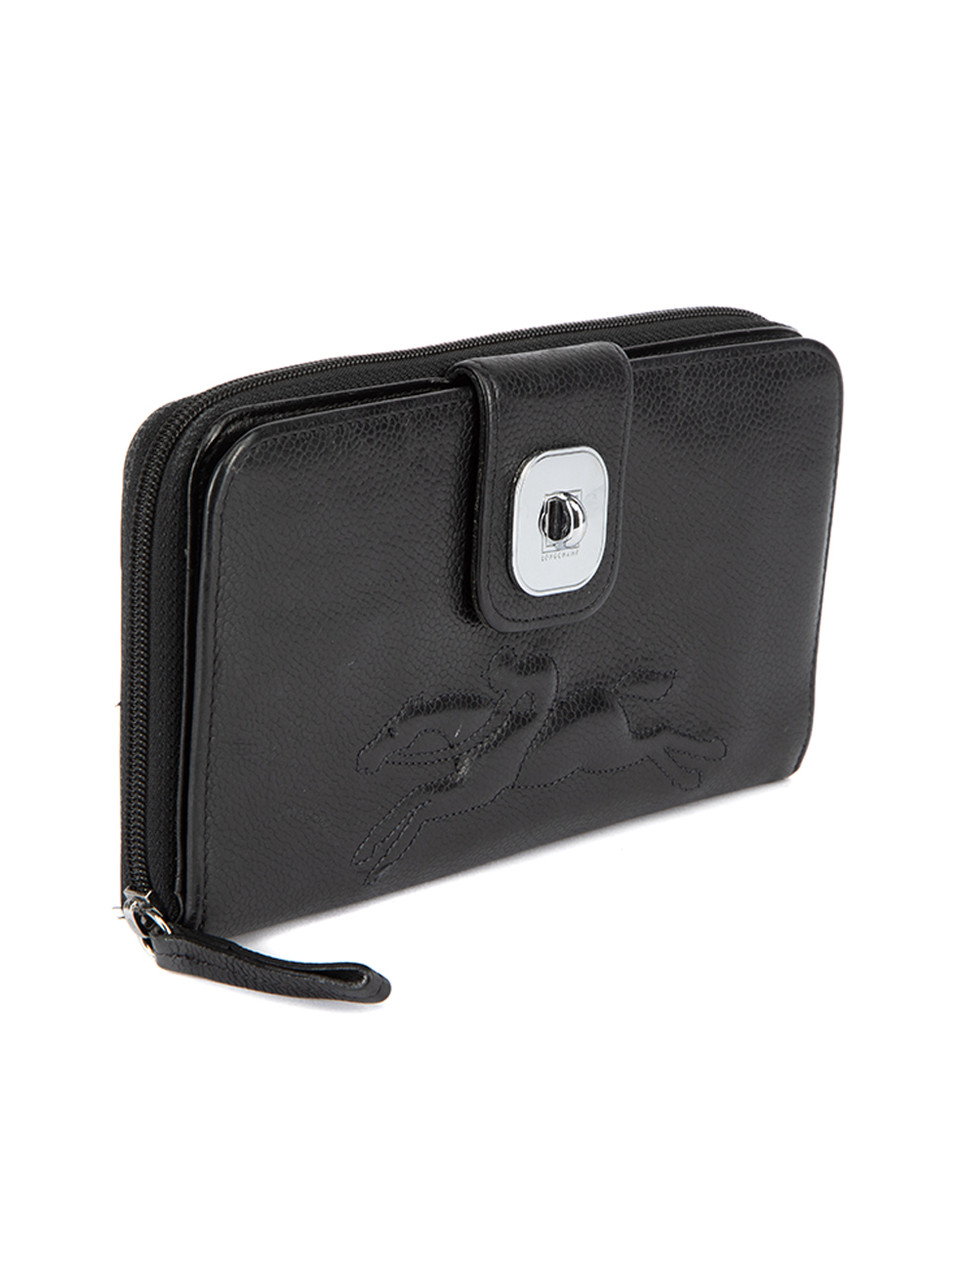 Longchamp Black Continental Embroidered Wallet